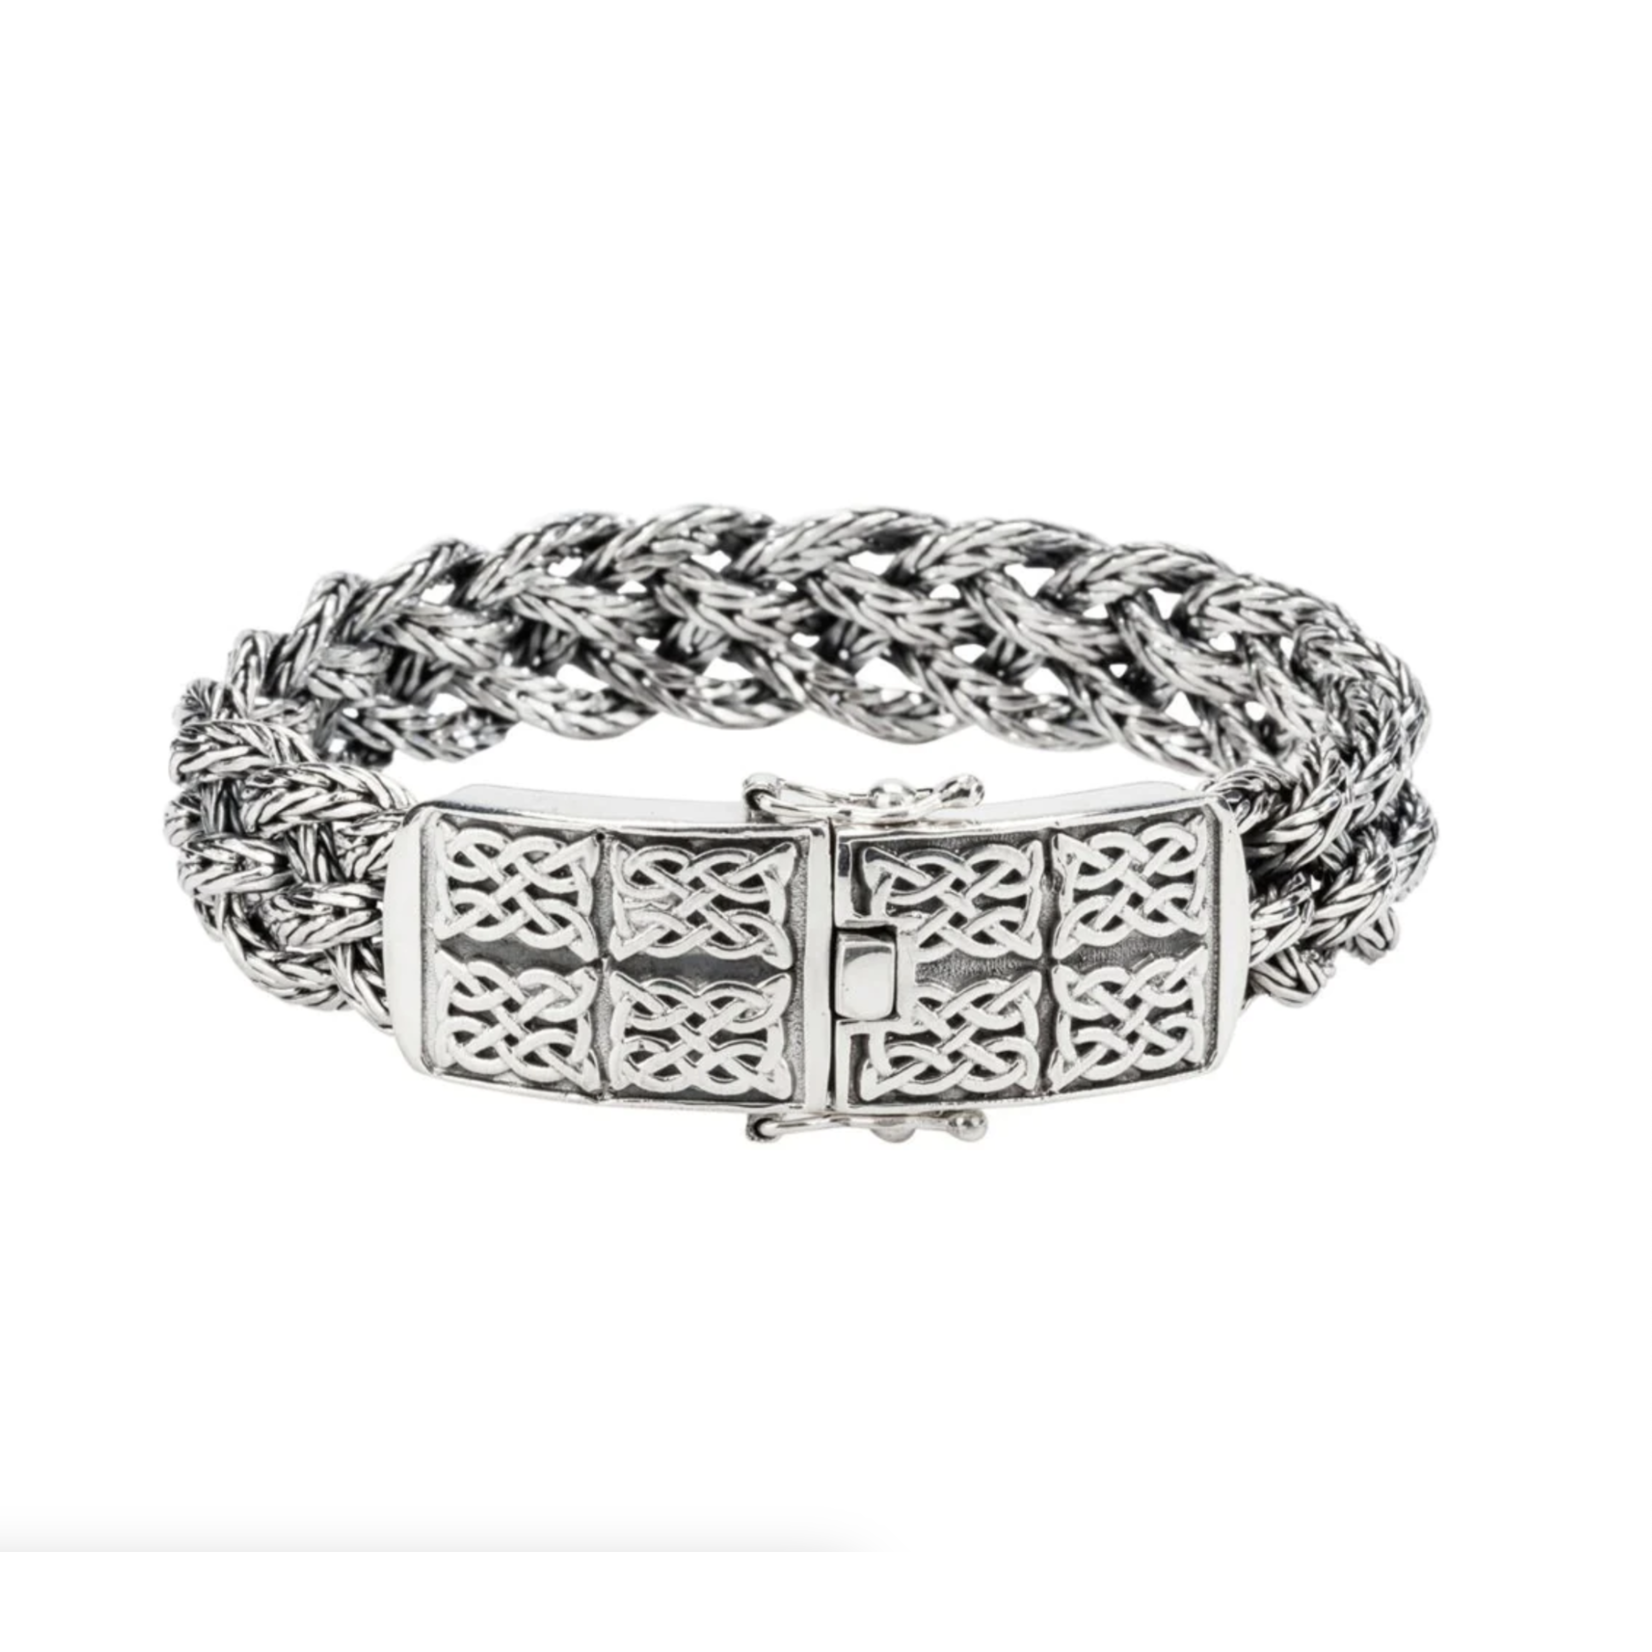 Keith Jack Norse Forge Dragon Weave Bracelet - 8 inch